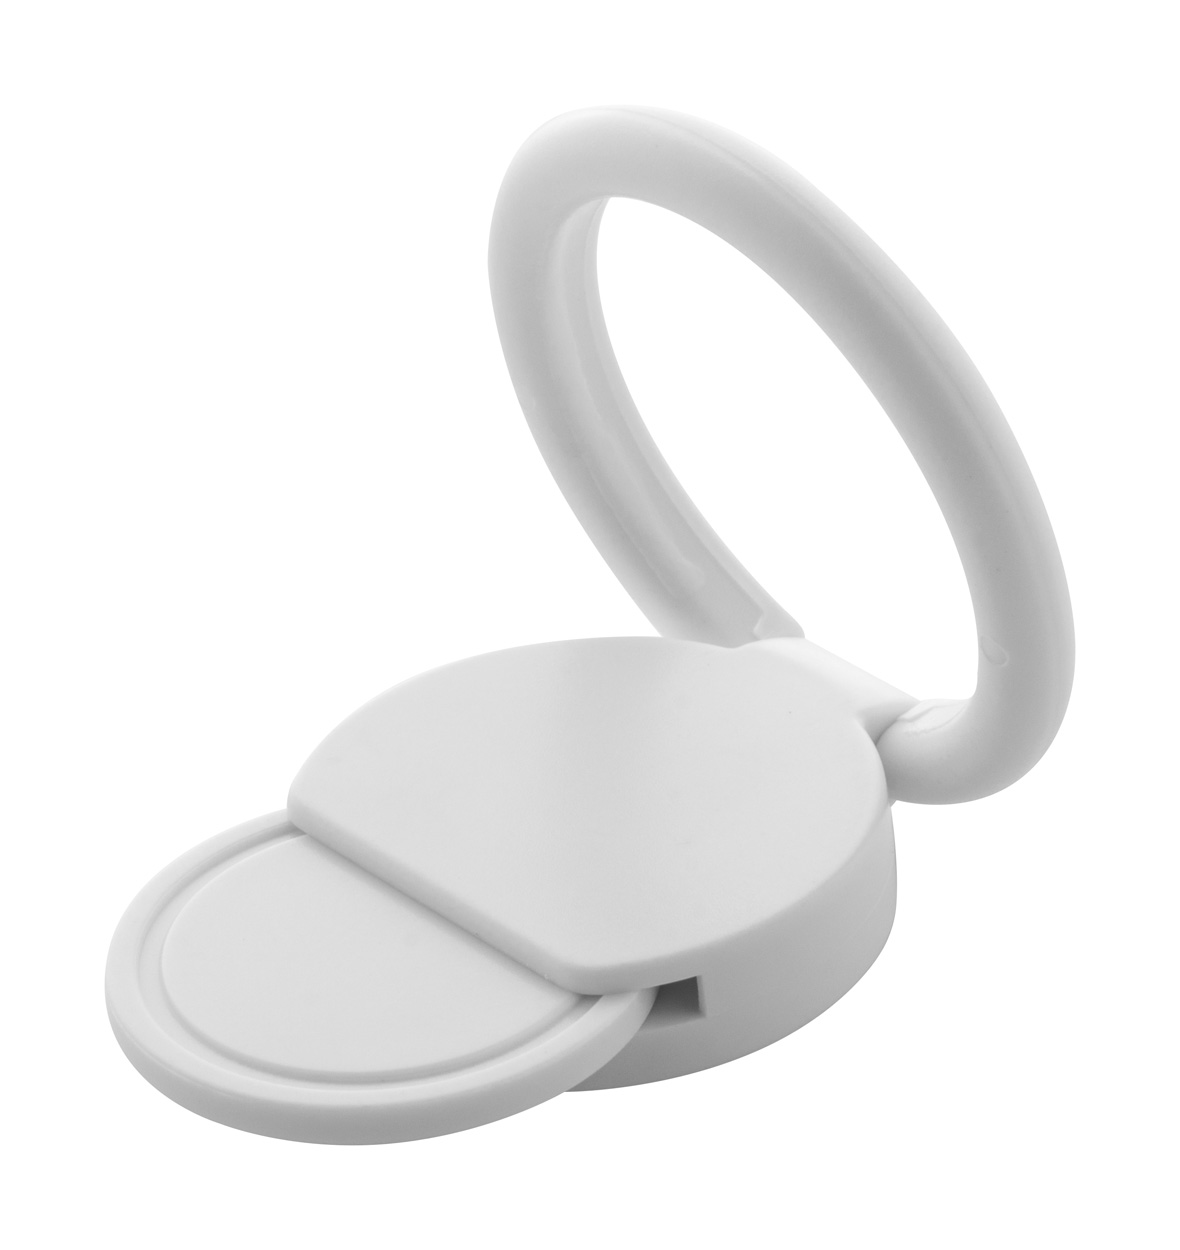 Sustre antibacterial mobile phone stand - white